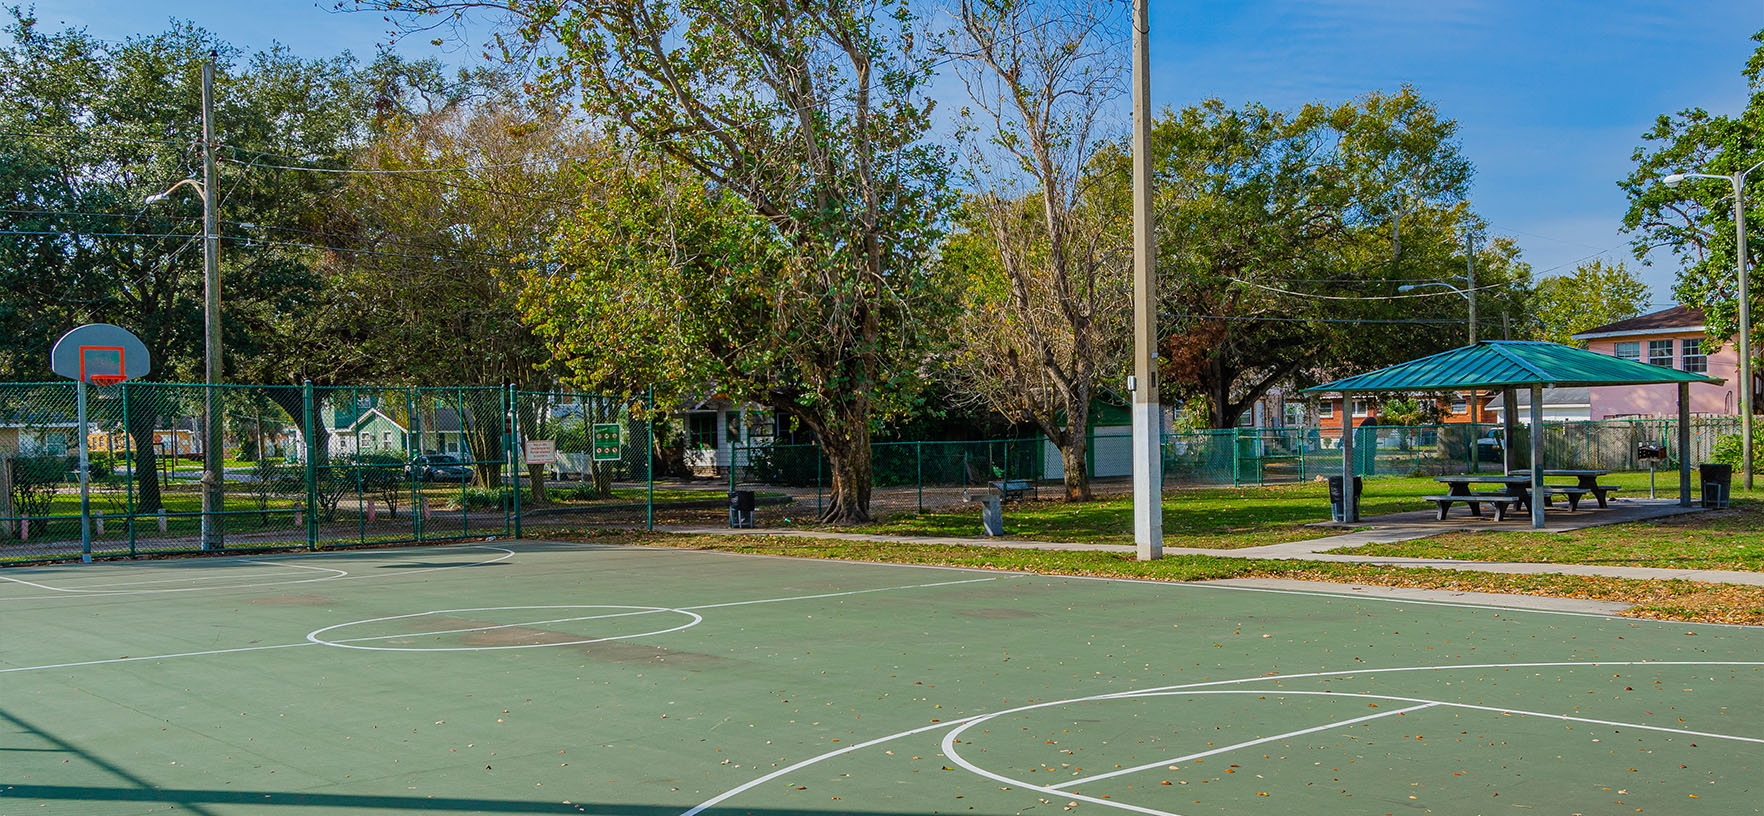 Silver Lake Playlot Outdoor Basketball Court